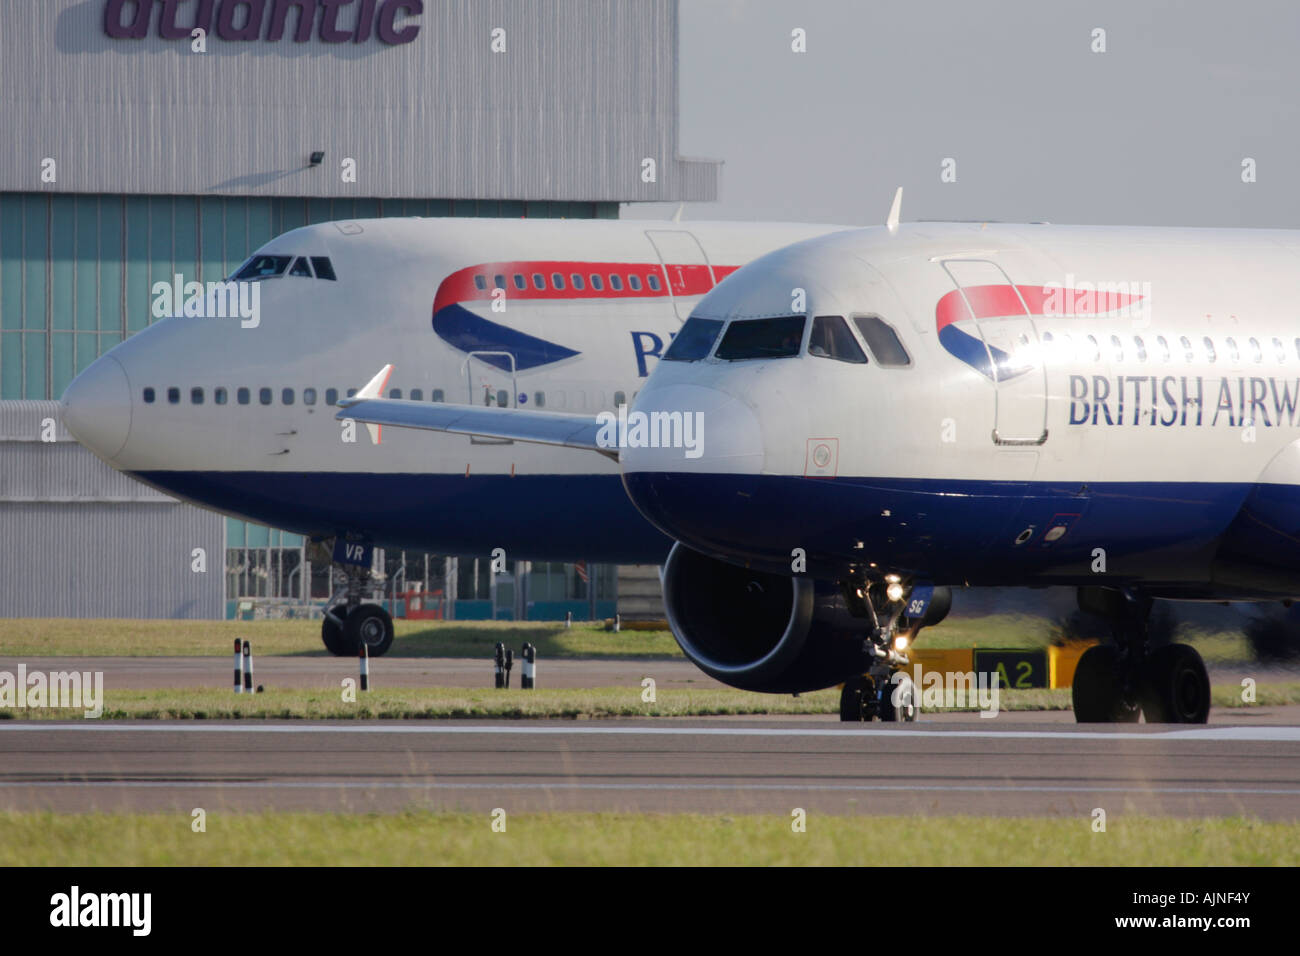 British Airways Airbus A320 and Boeing 747 taxiing for departure at London Heathrow Airport, UK Stock Photo